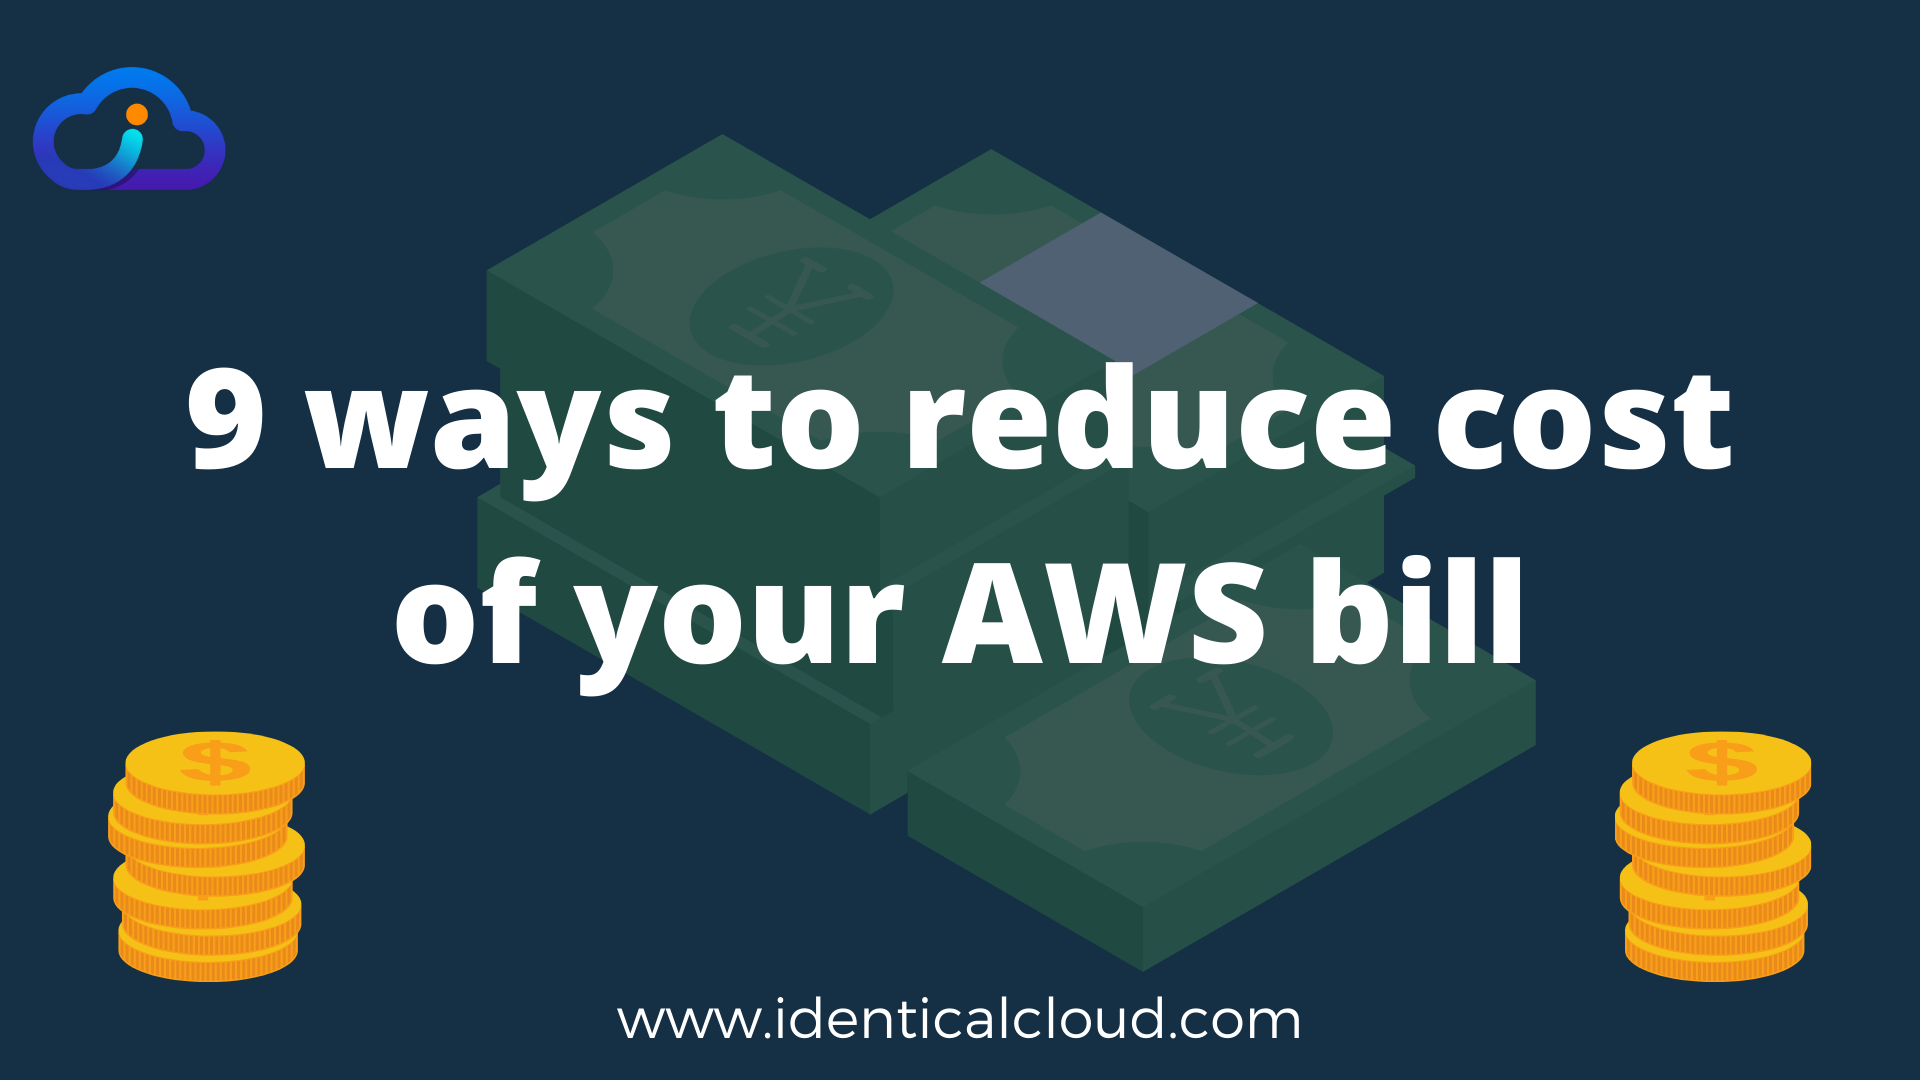 9 ways to reduce cost of your AWS bill